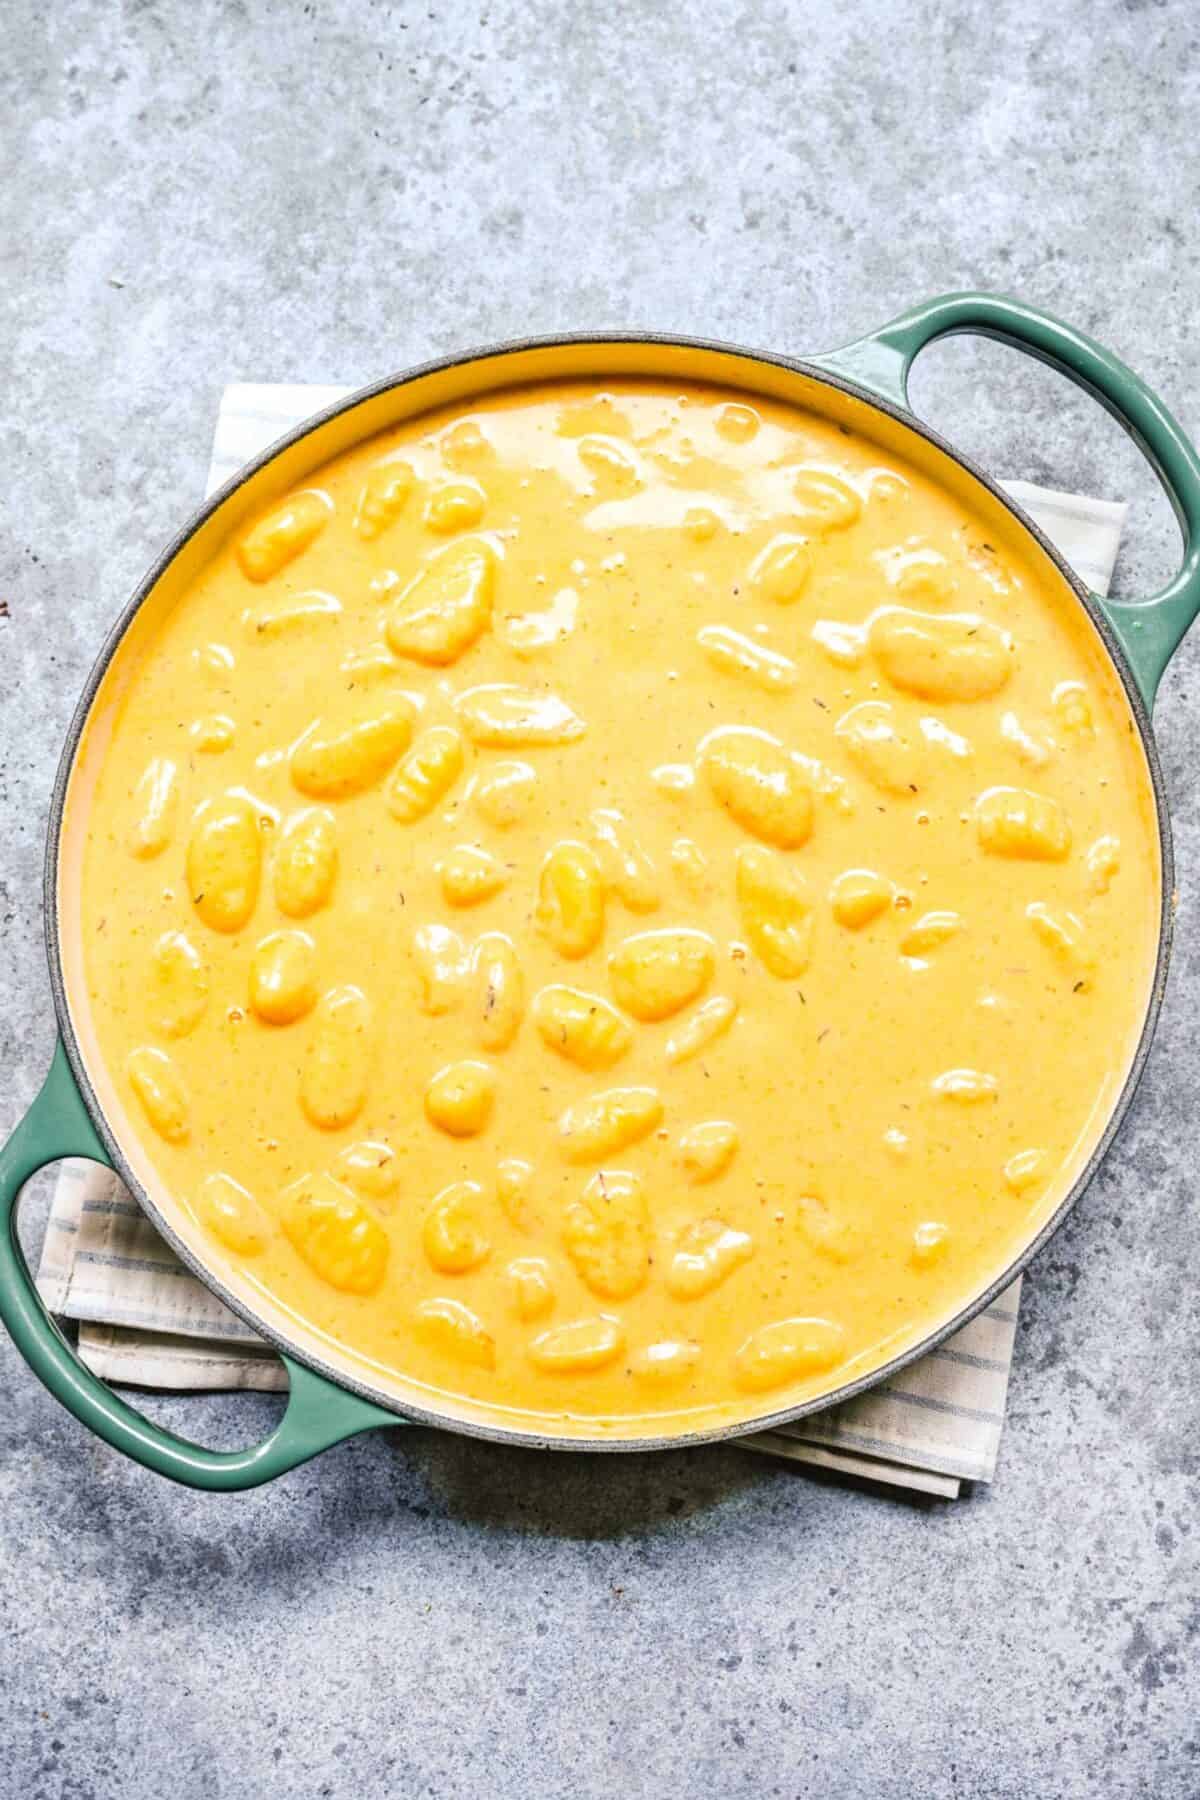 A baking dish filled with unbaked gnocchi in pumpkin sauce, on a kitchen towel